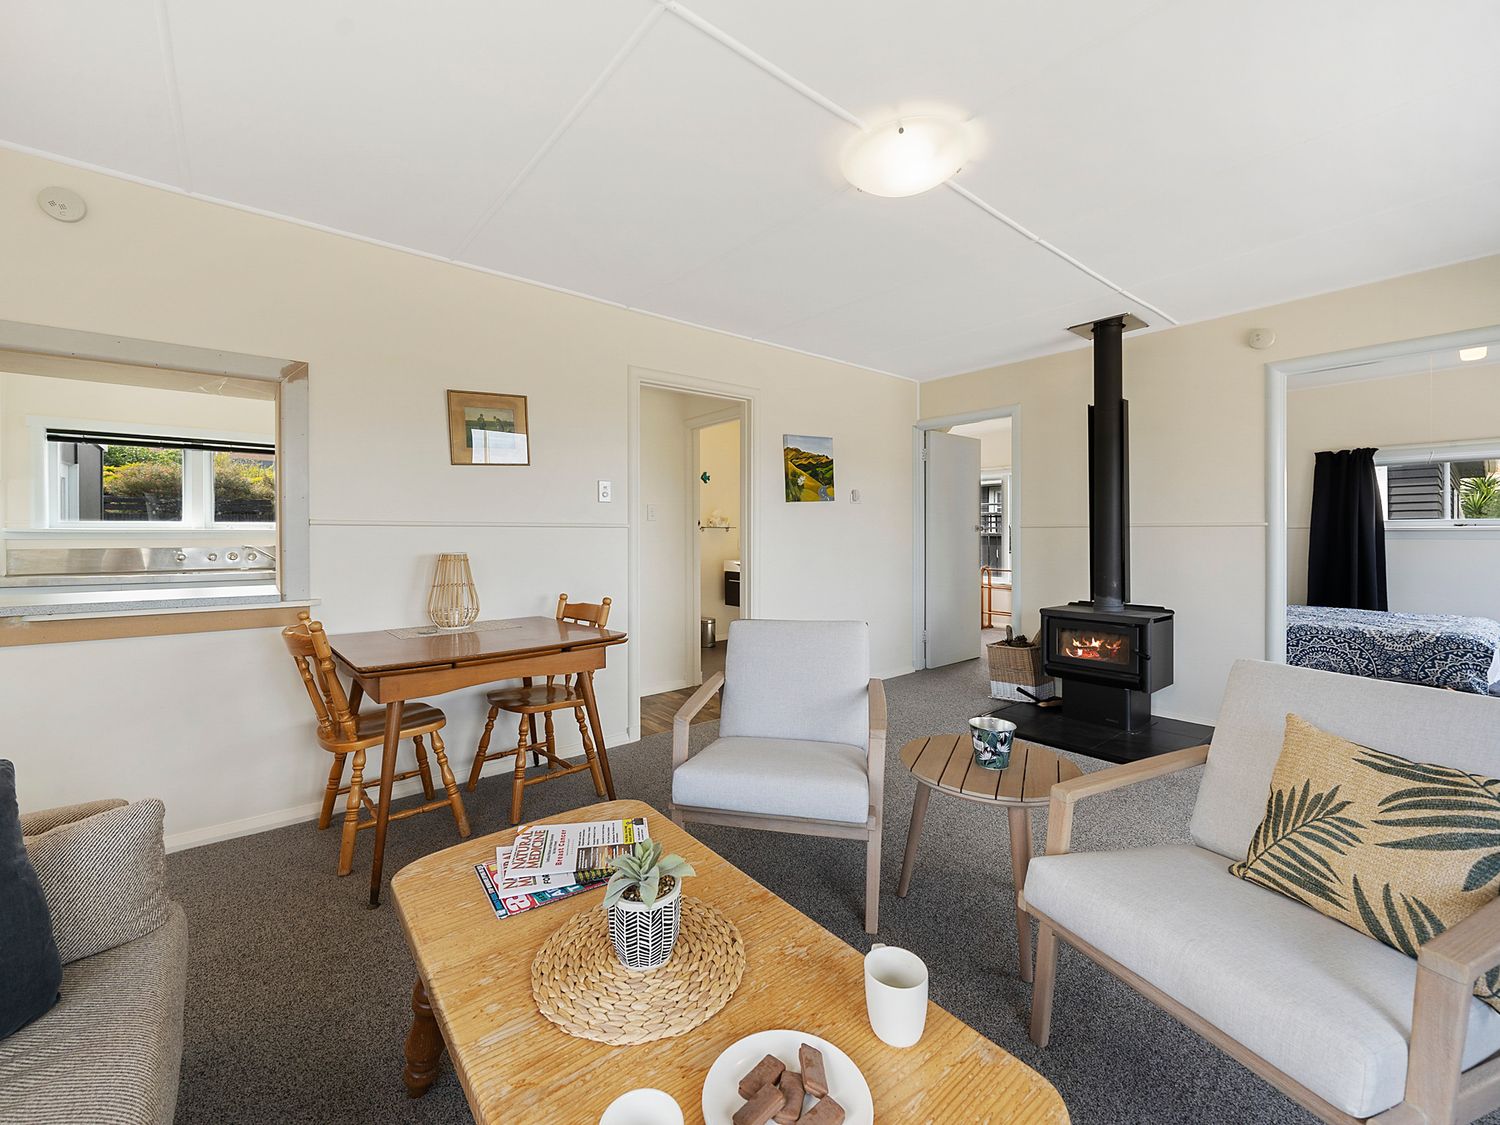 The Green Trout - Paraparaumu Beach Holiday Home -  - 1032997 - photo 1